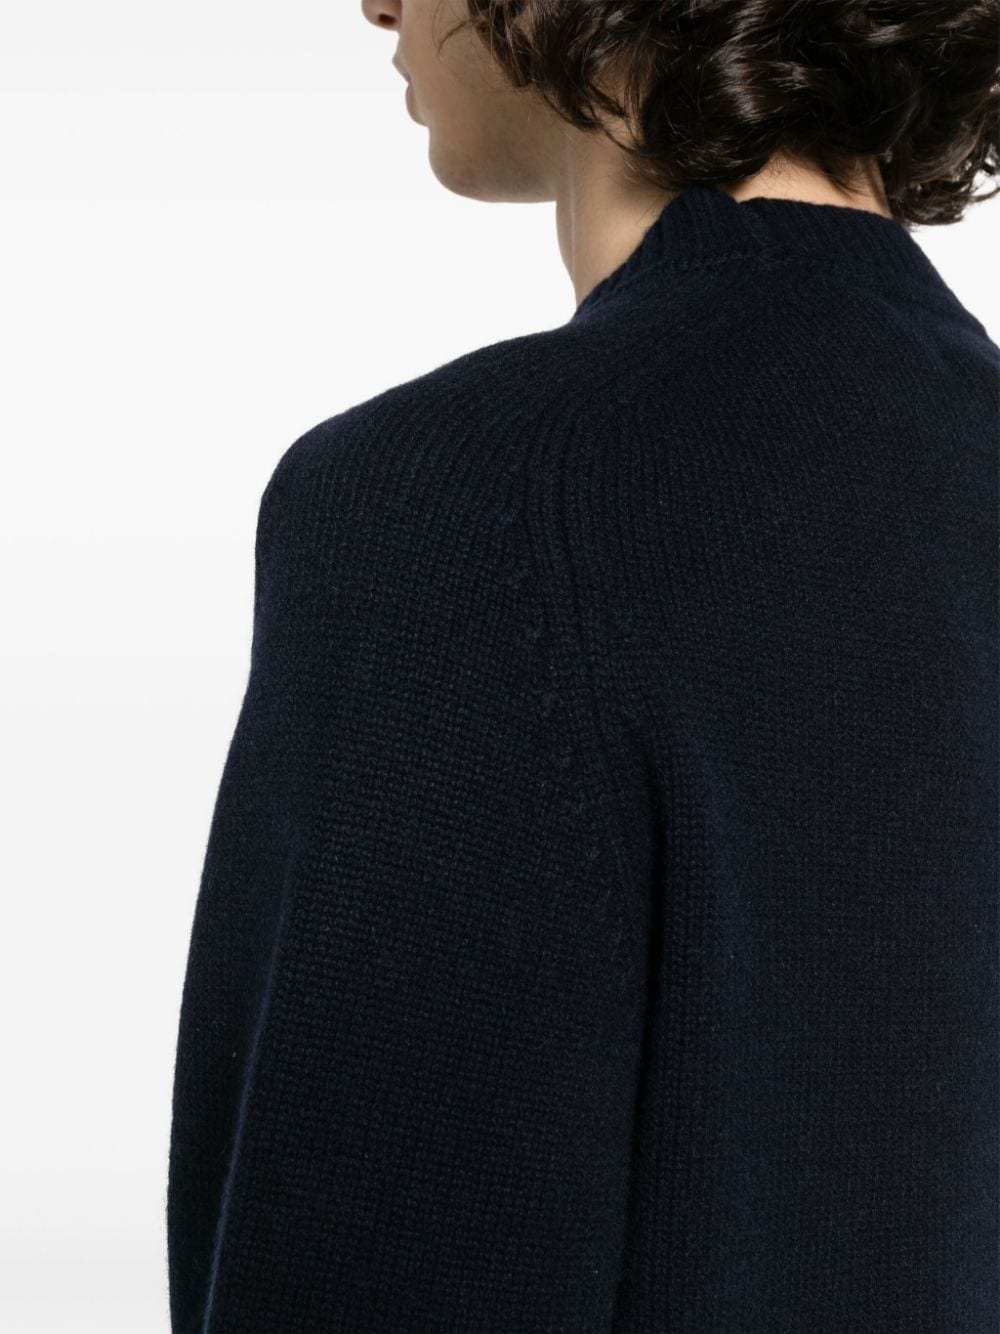 Bourgeois cashmere jumper - 5